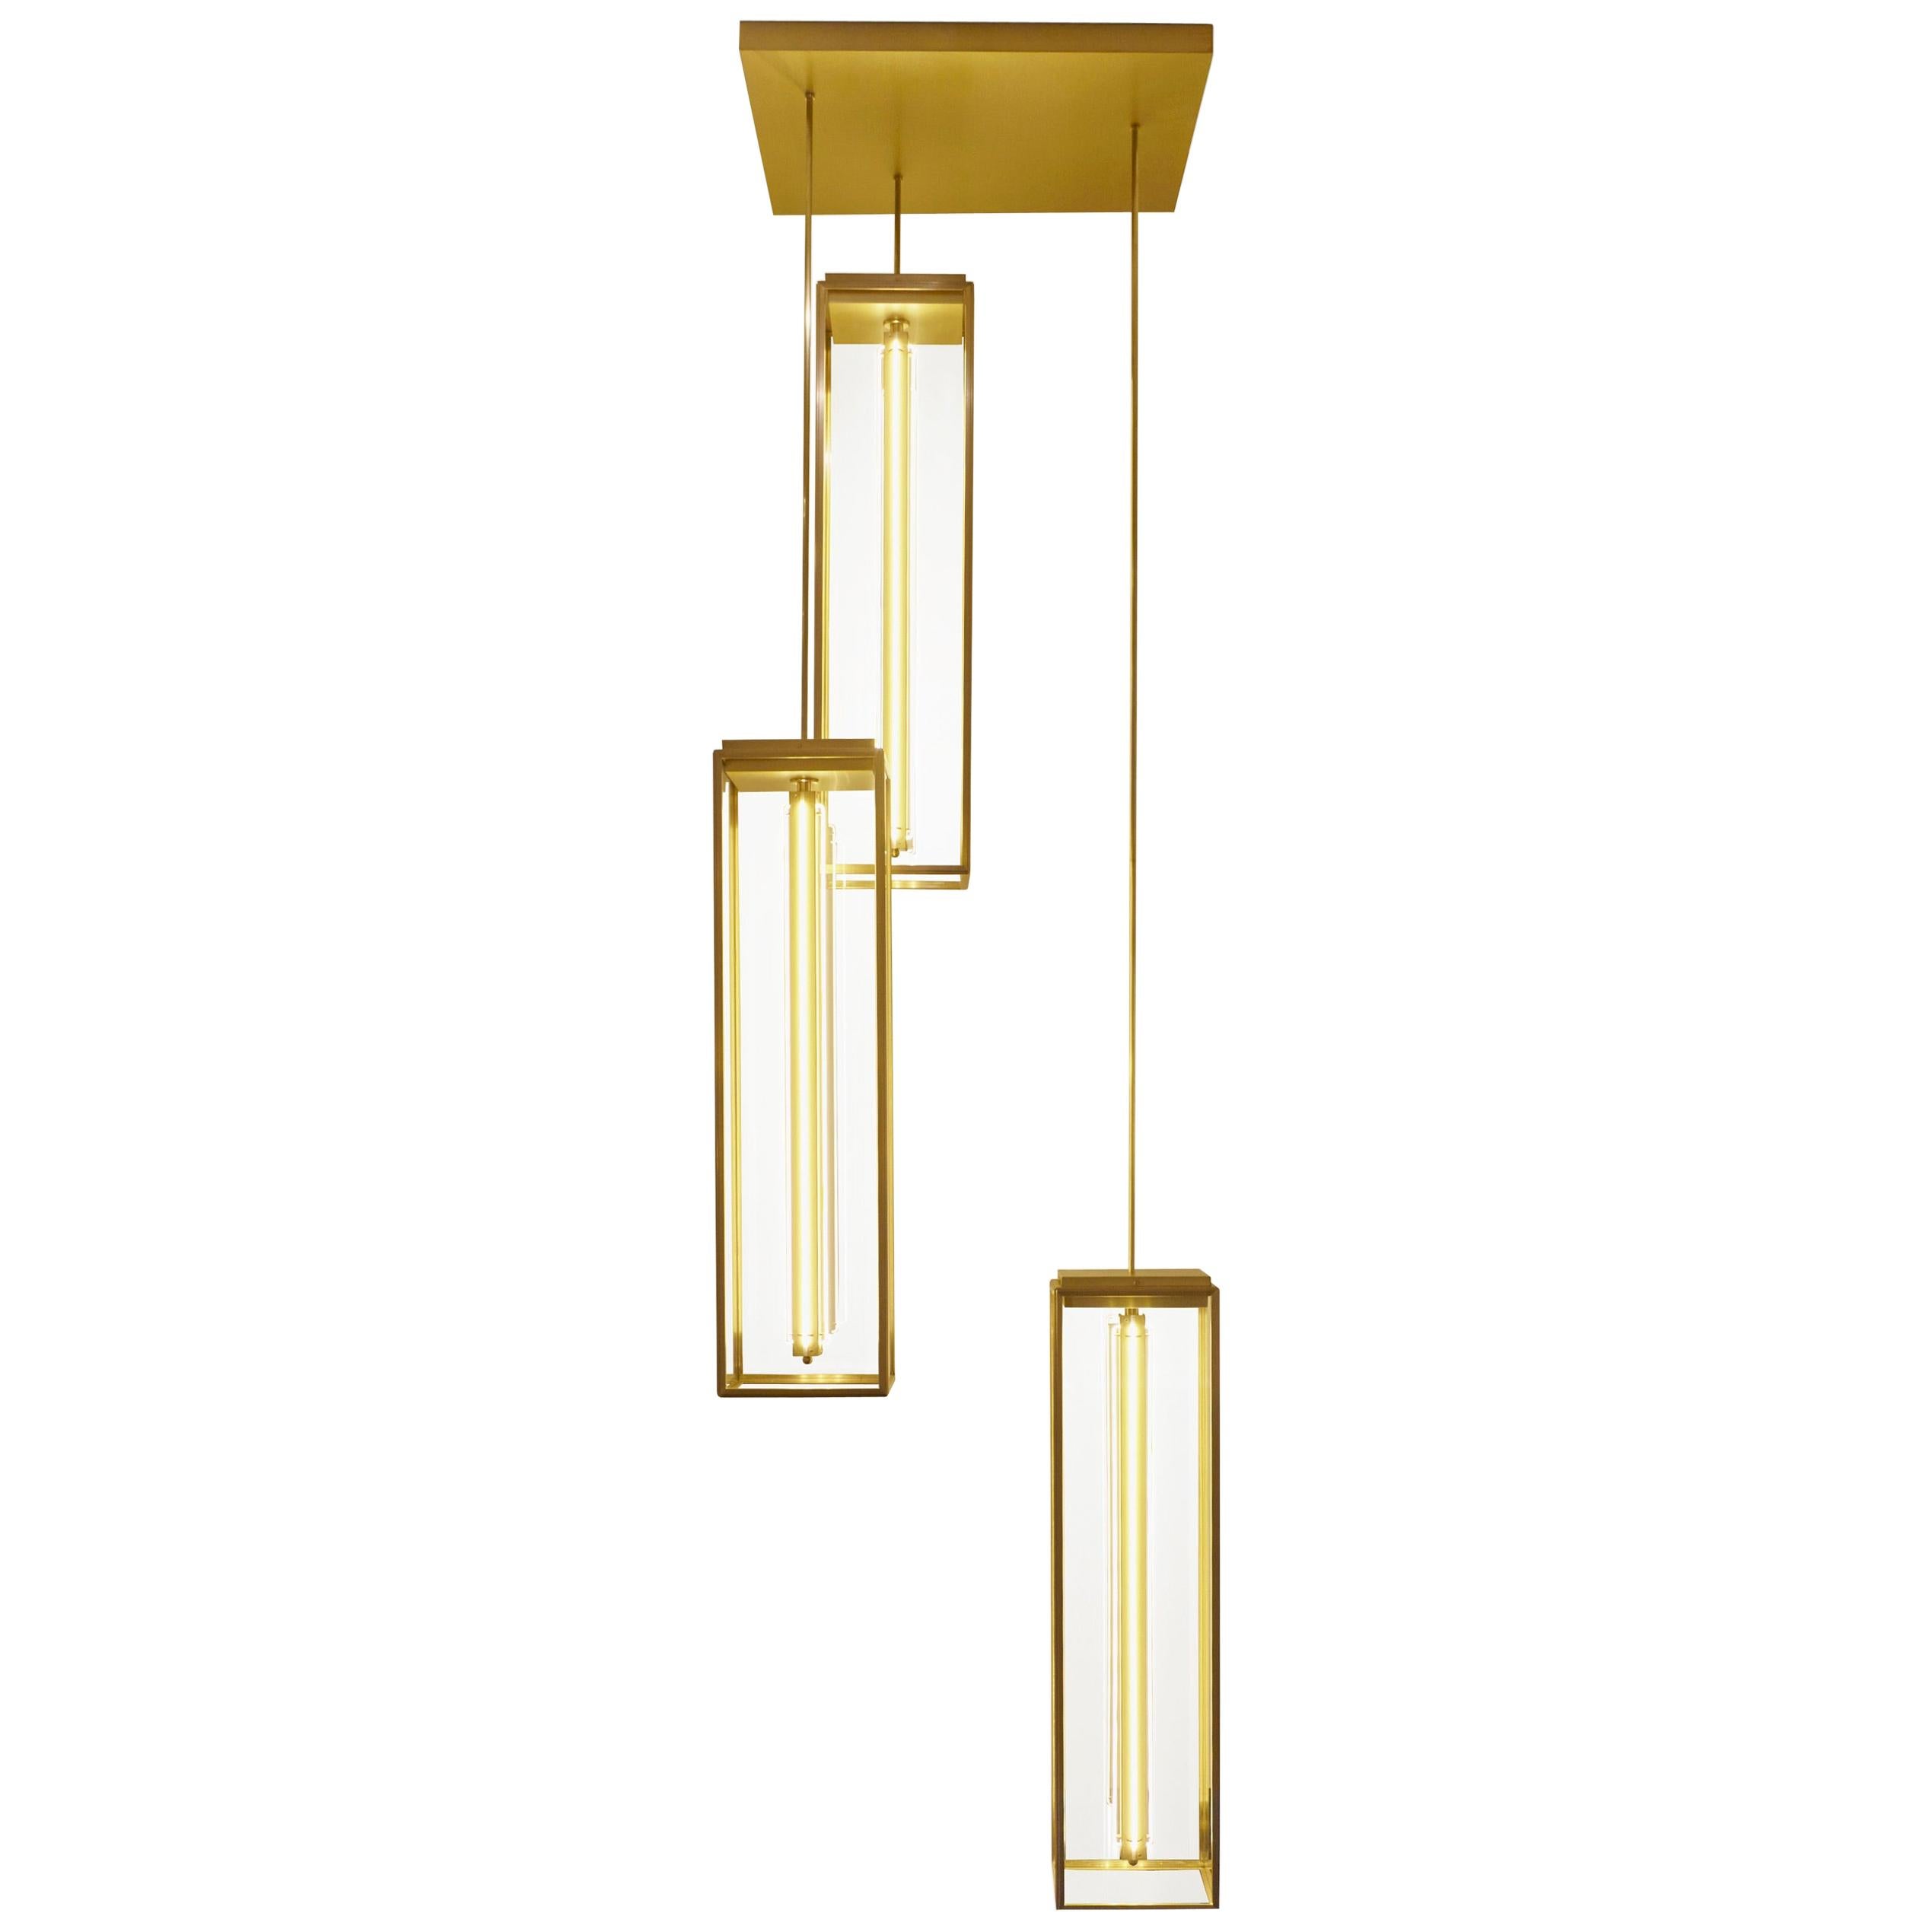 Hanging light in dark bronze with inside fitted clear glass, closed top. With fixed tube (on measure) and ceiling dome (to order separately). Central lamp holder with four cold cathode lamps. For suspension options please inquire about additional